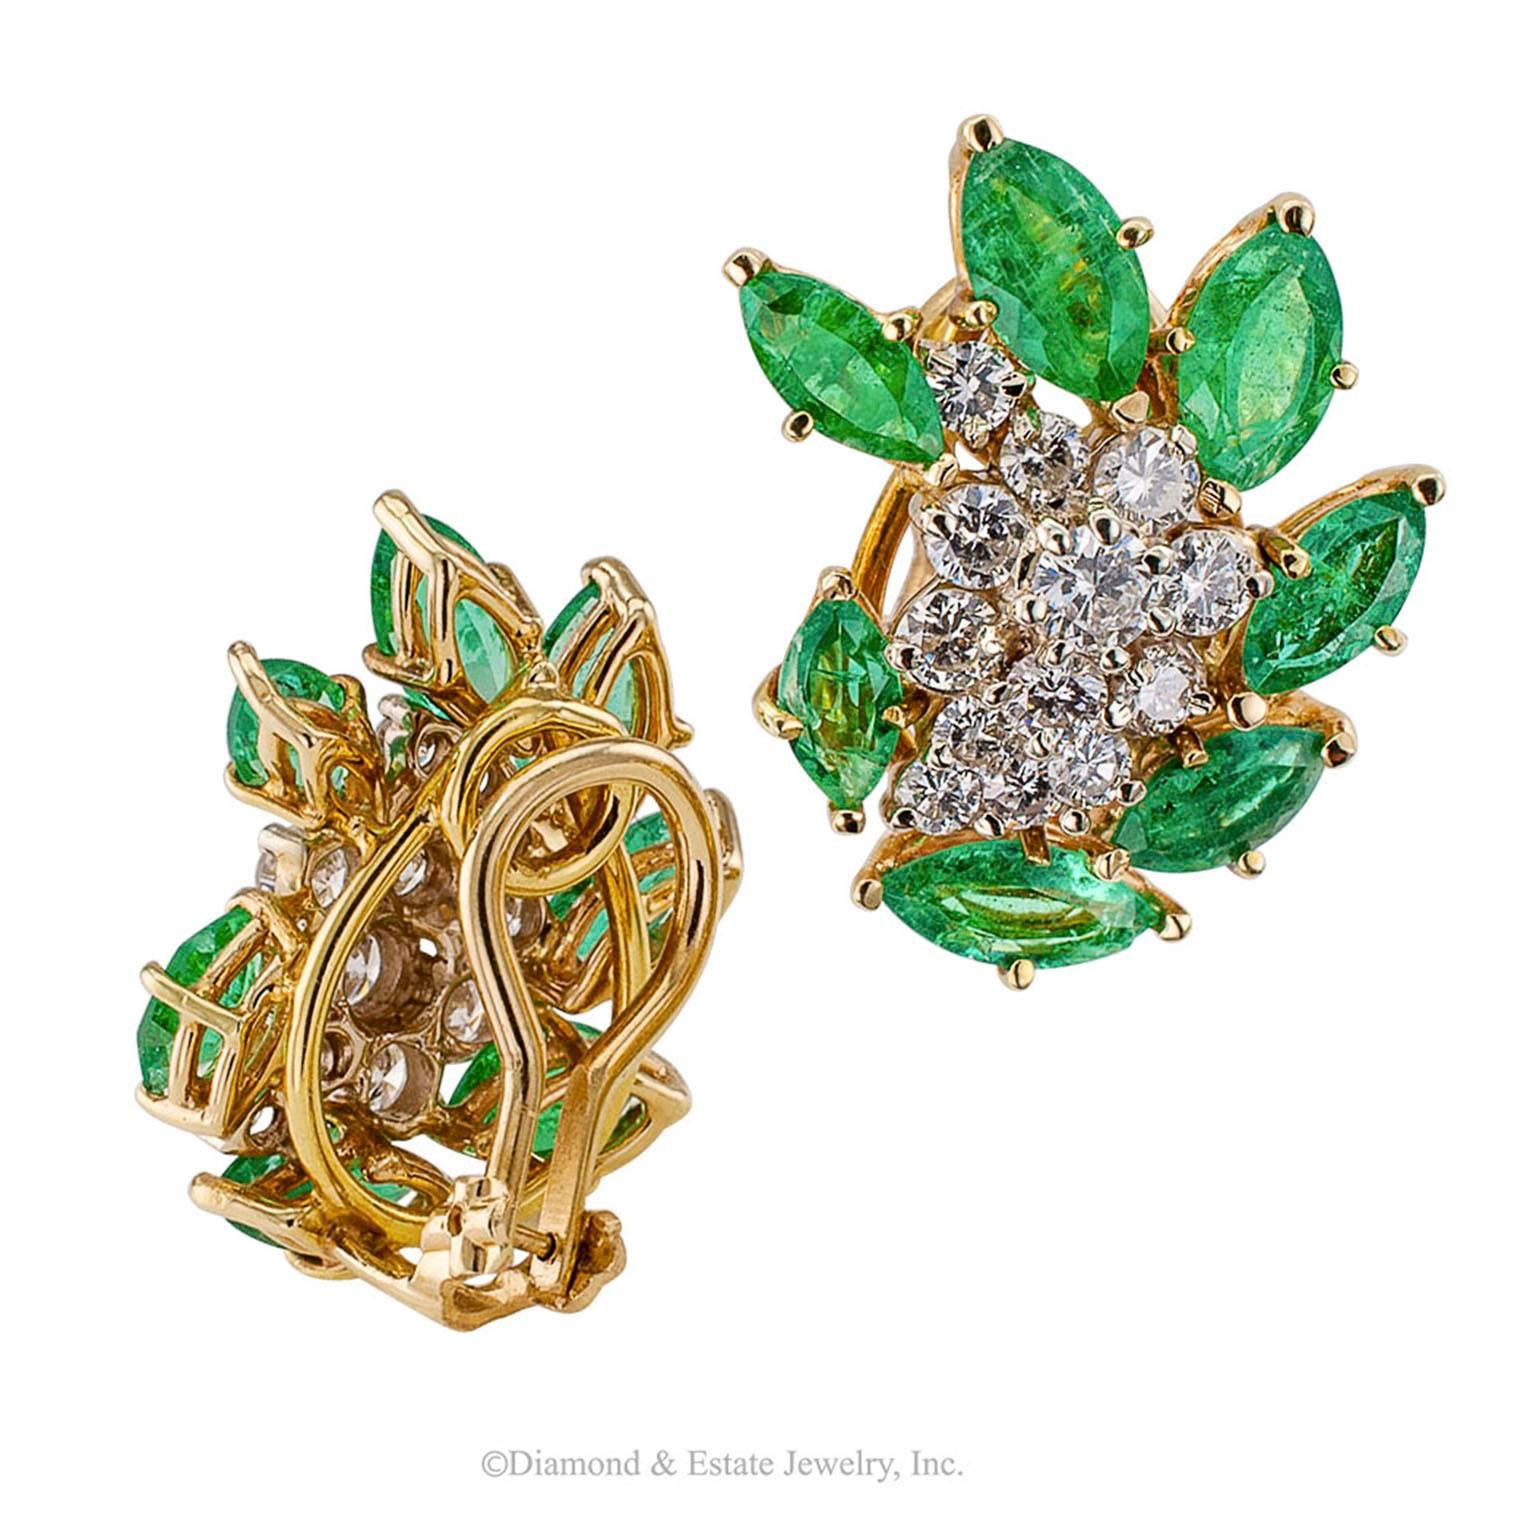 1970s Emerald Diamond Gold Ear Clips

1970s emerald and diamond  gold ear clips.  Designed as a cascading cluster of round brilliant-cut diamonds weighing approximately 1.50 carats, approximately H color and SI clarity, within a radiating border of